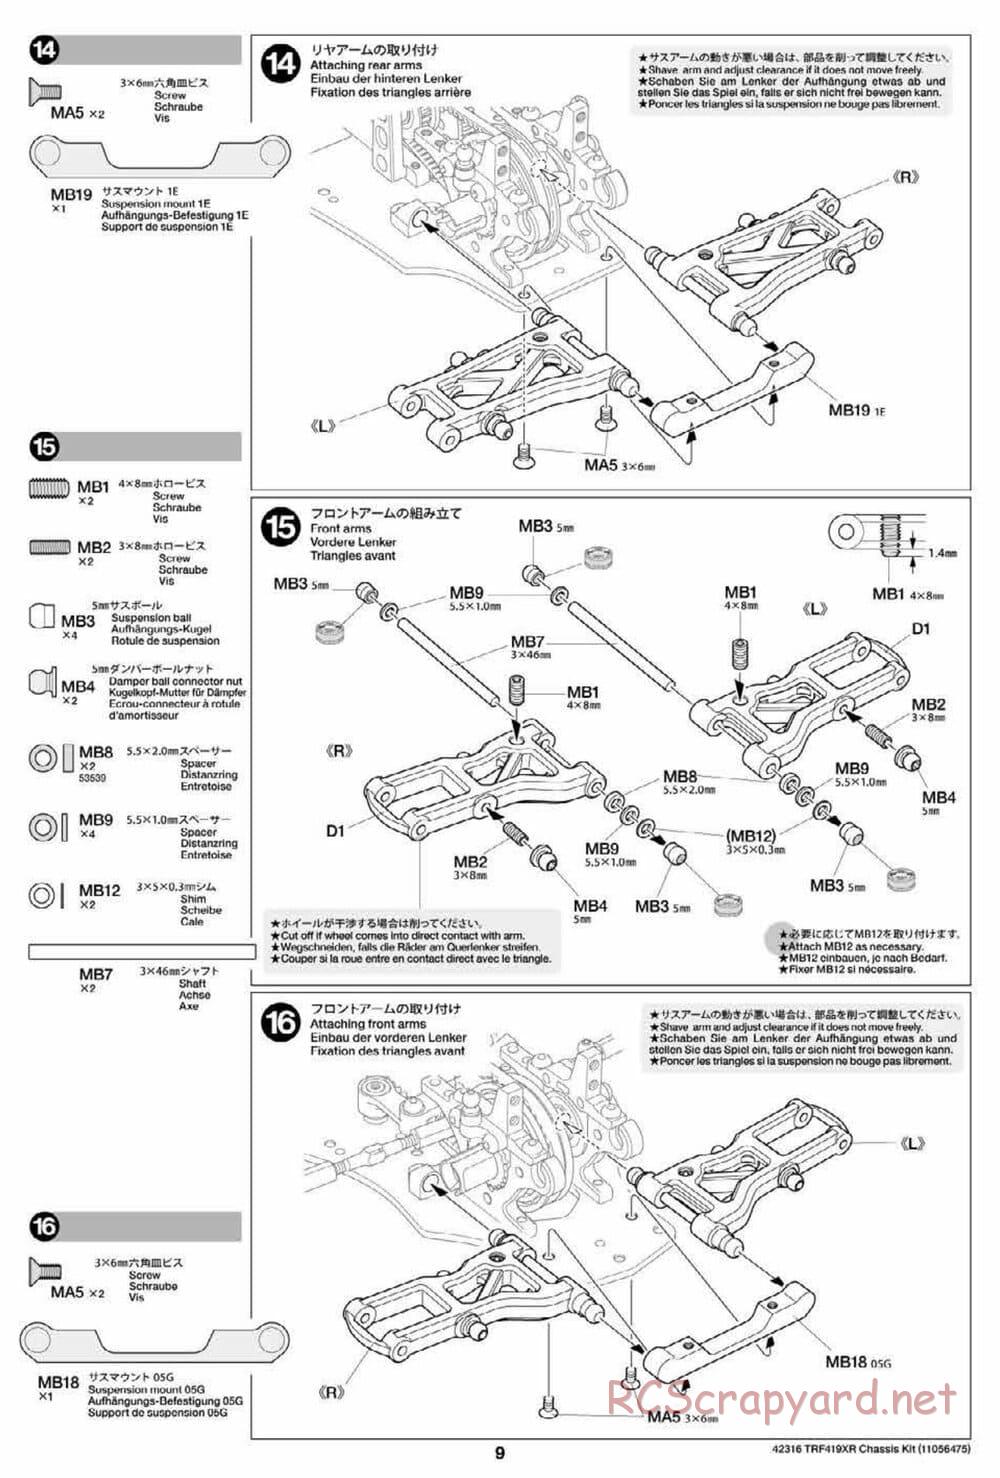 Tamiya - TRF419XR Chassis - Manual - Page 9